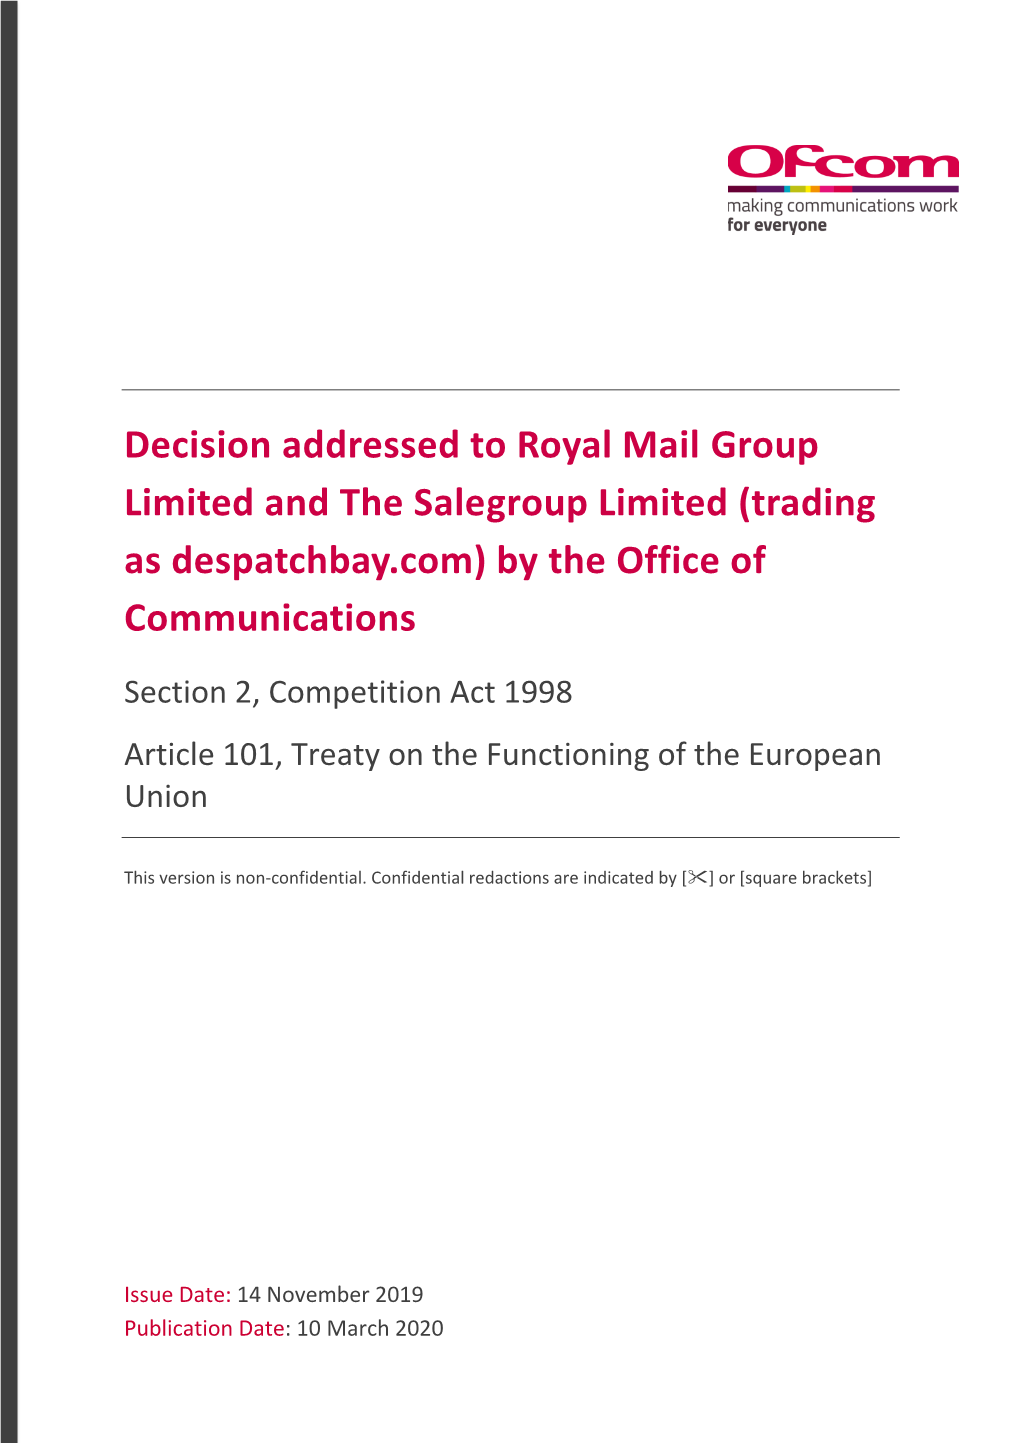 Decision Addressed to Royal Mail Group Limited and the Salegroup Limited (Trading As Despatchbay.Com) by the Office of Communications